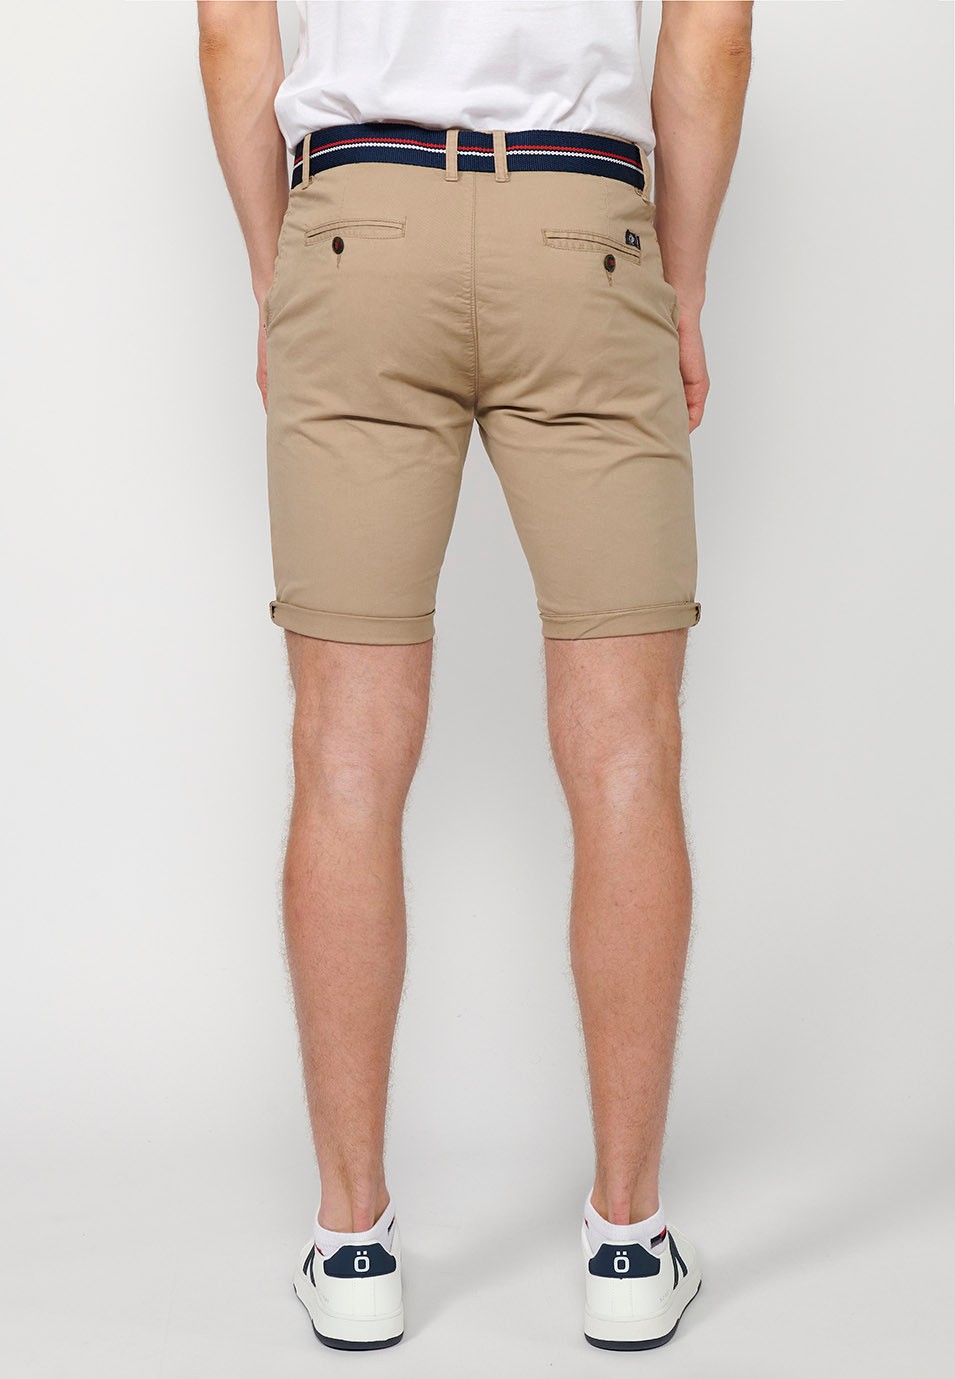 Shorts with a turn-up finish with front closure with zipper and button and belt in Beige Color for Men 1